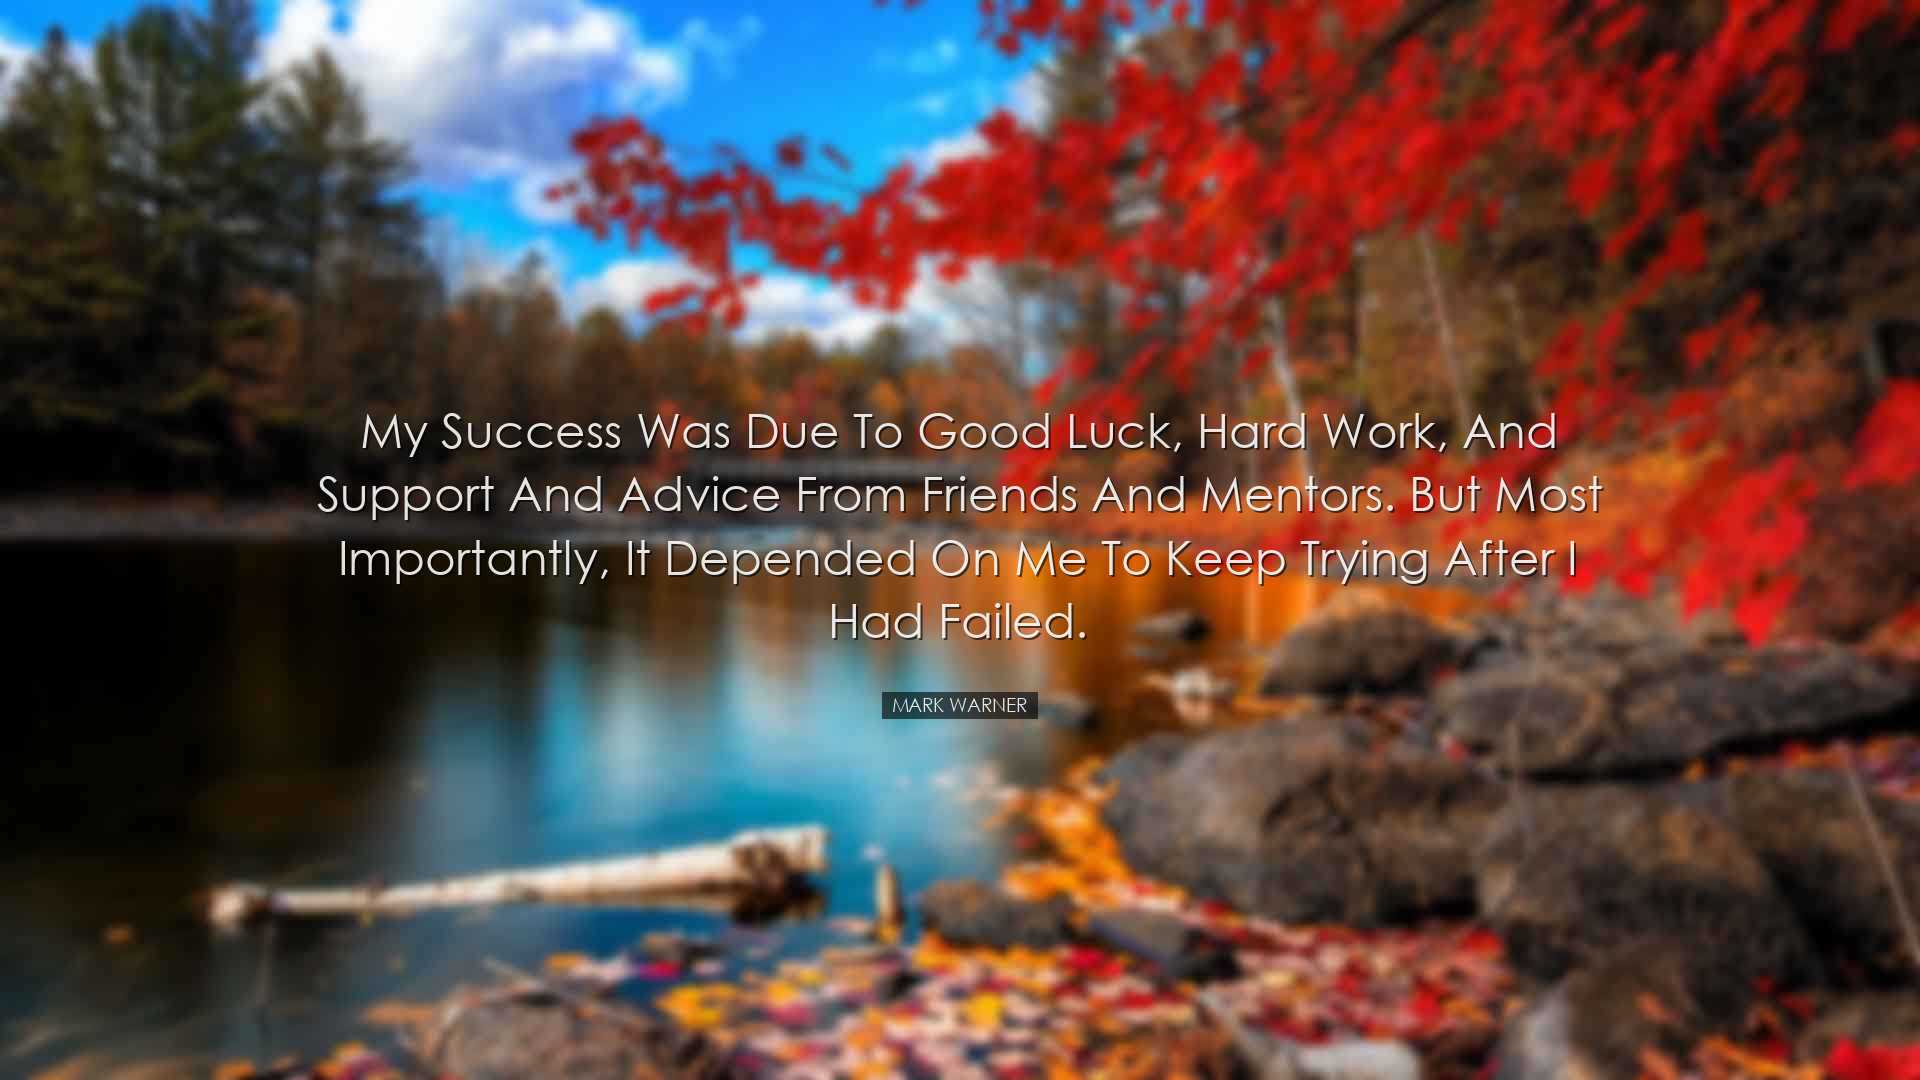 My success was due to good luck, hard work, and support and advice